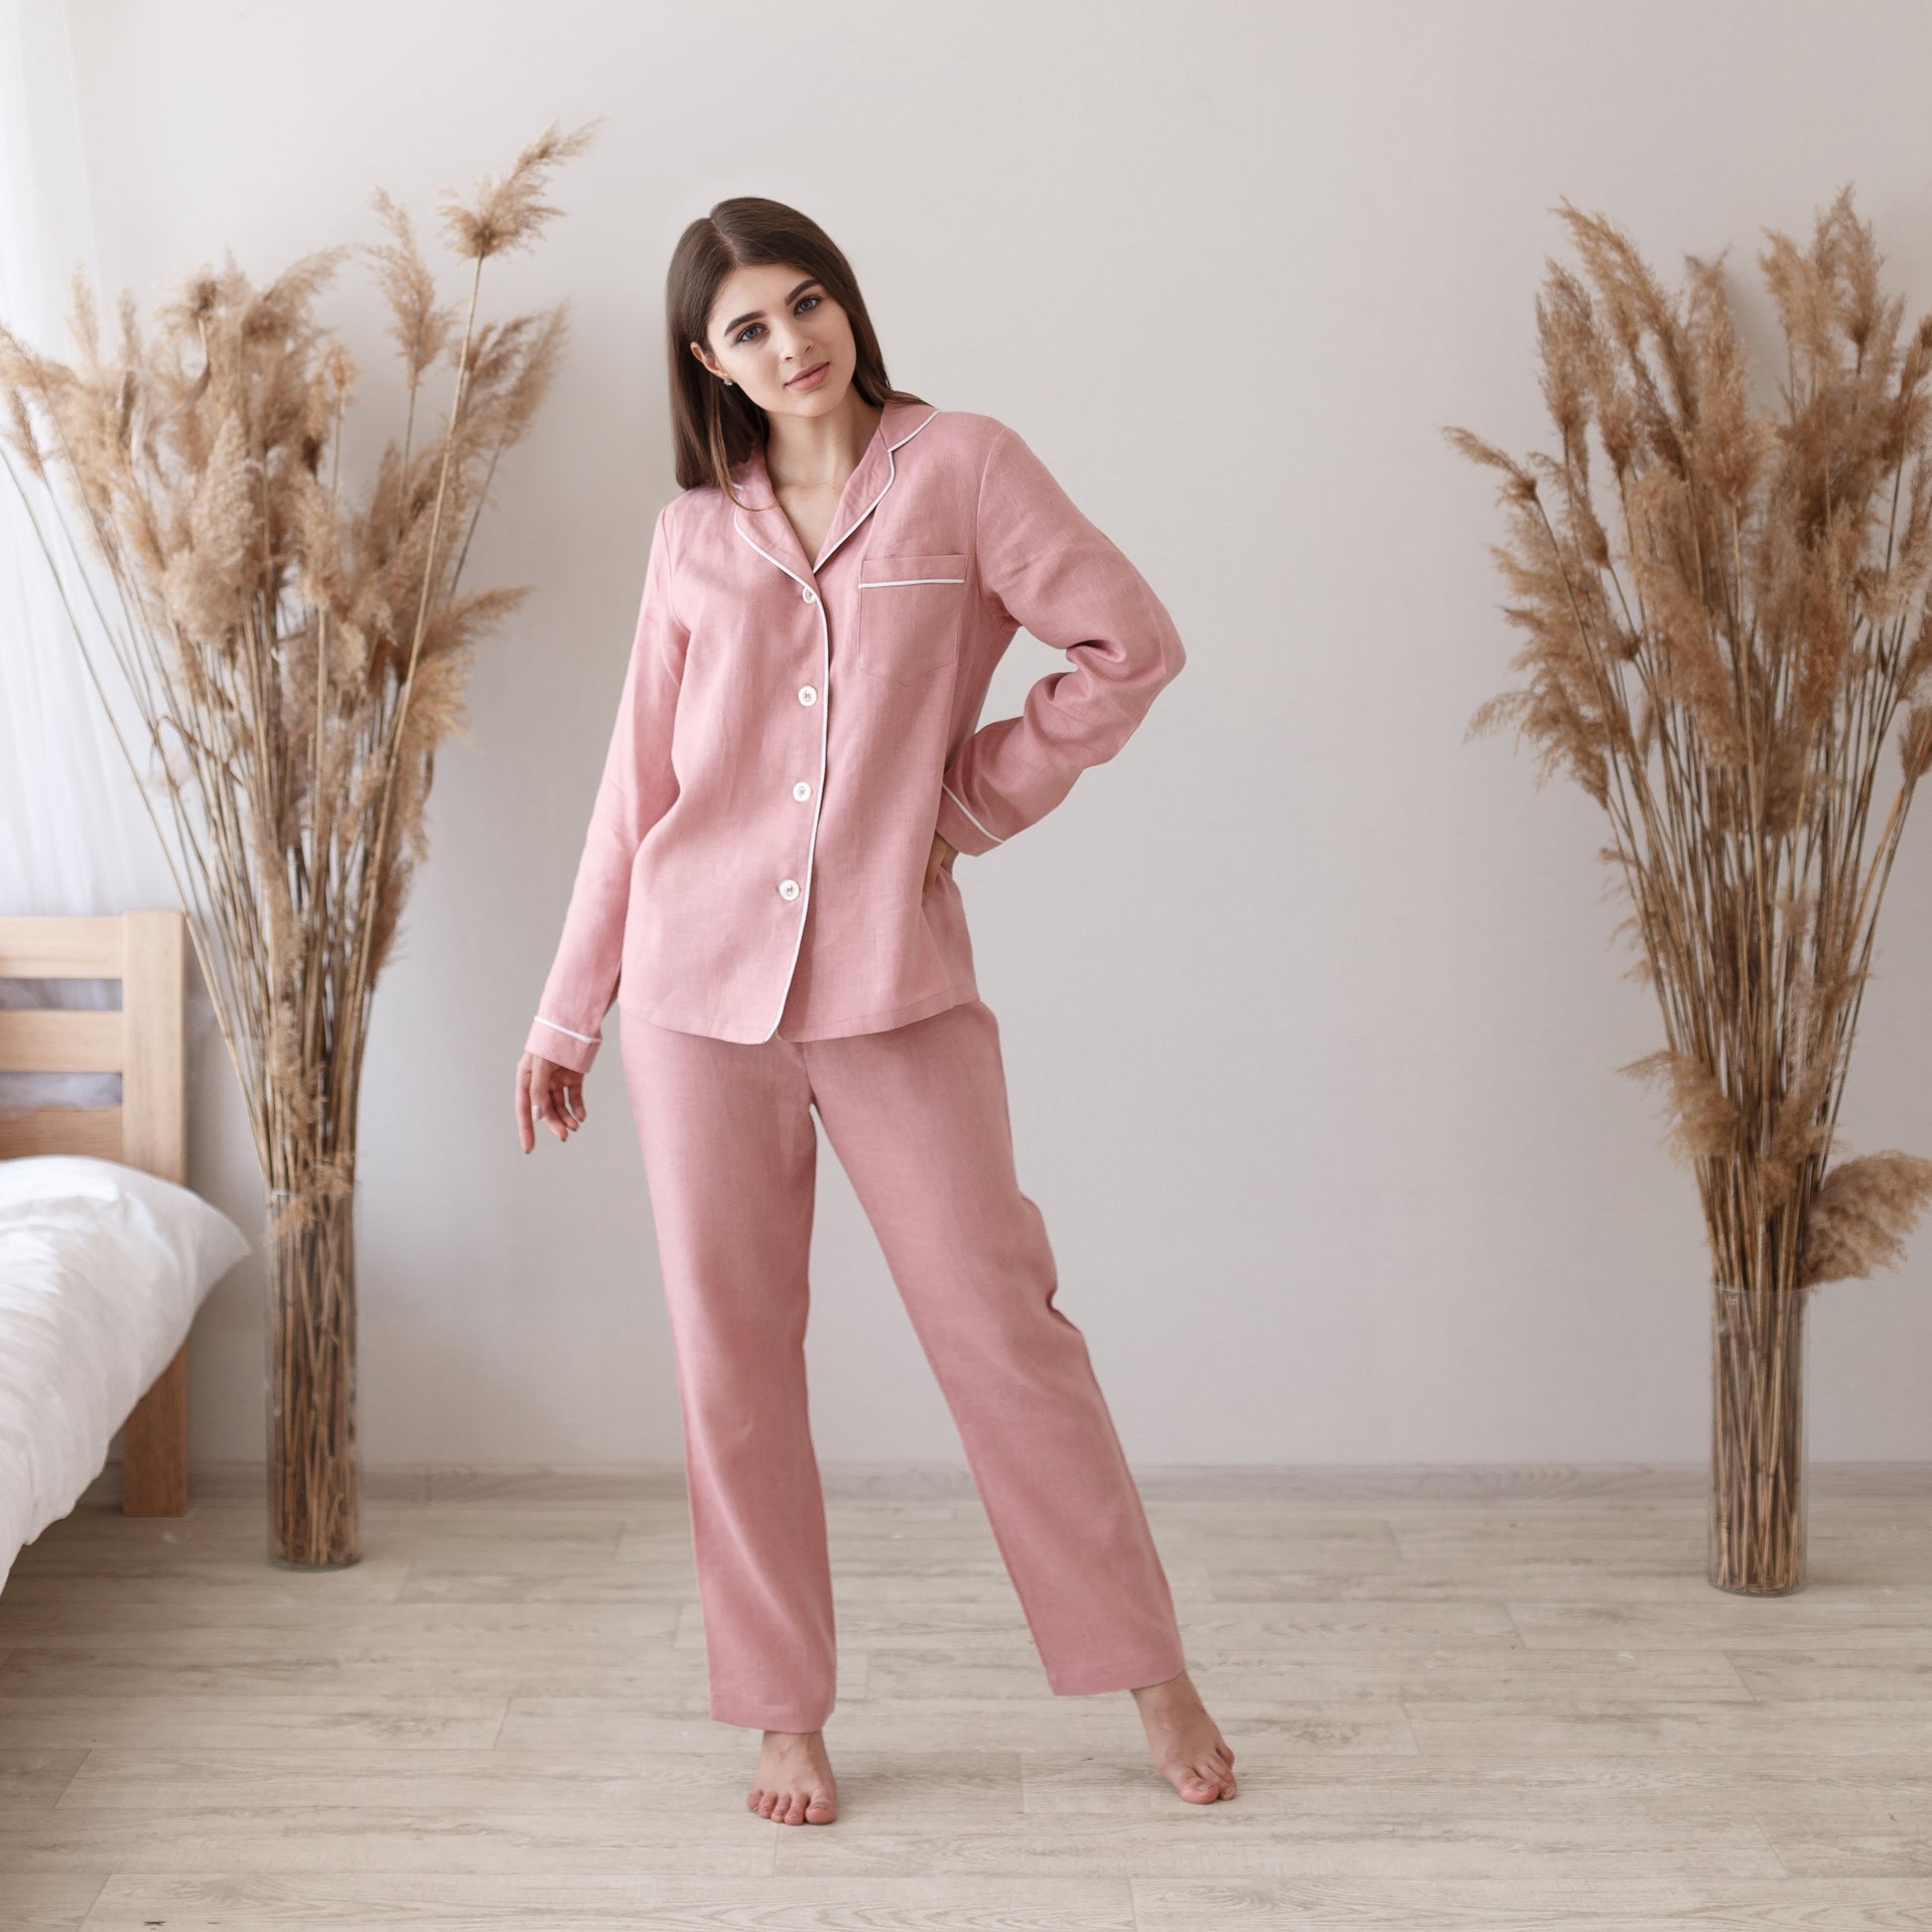 Luxurious Pink Linen Pajama Set with Piping - Long Sleeve Robe and Pants